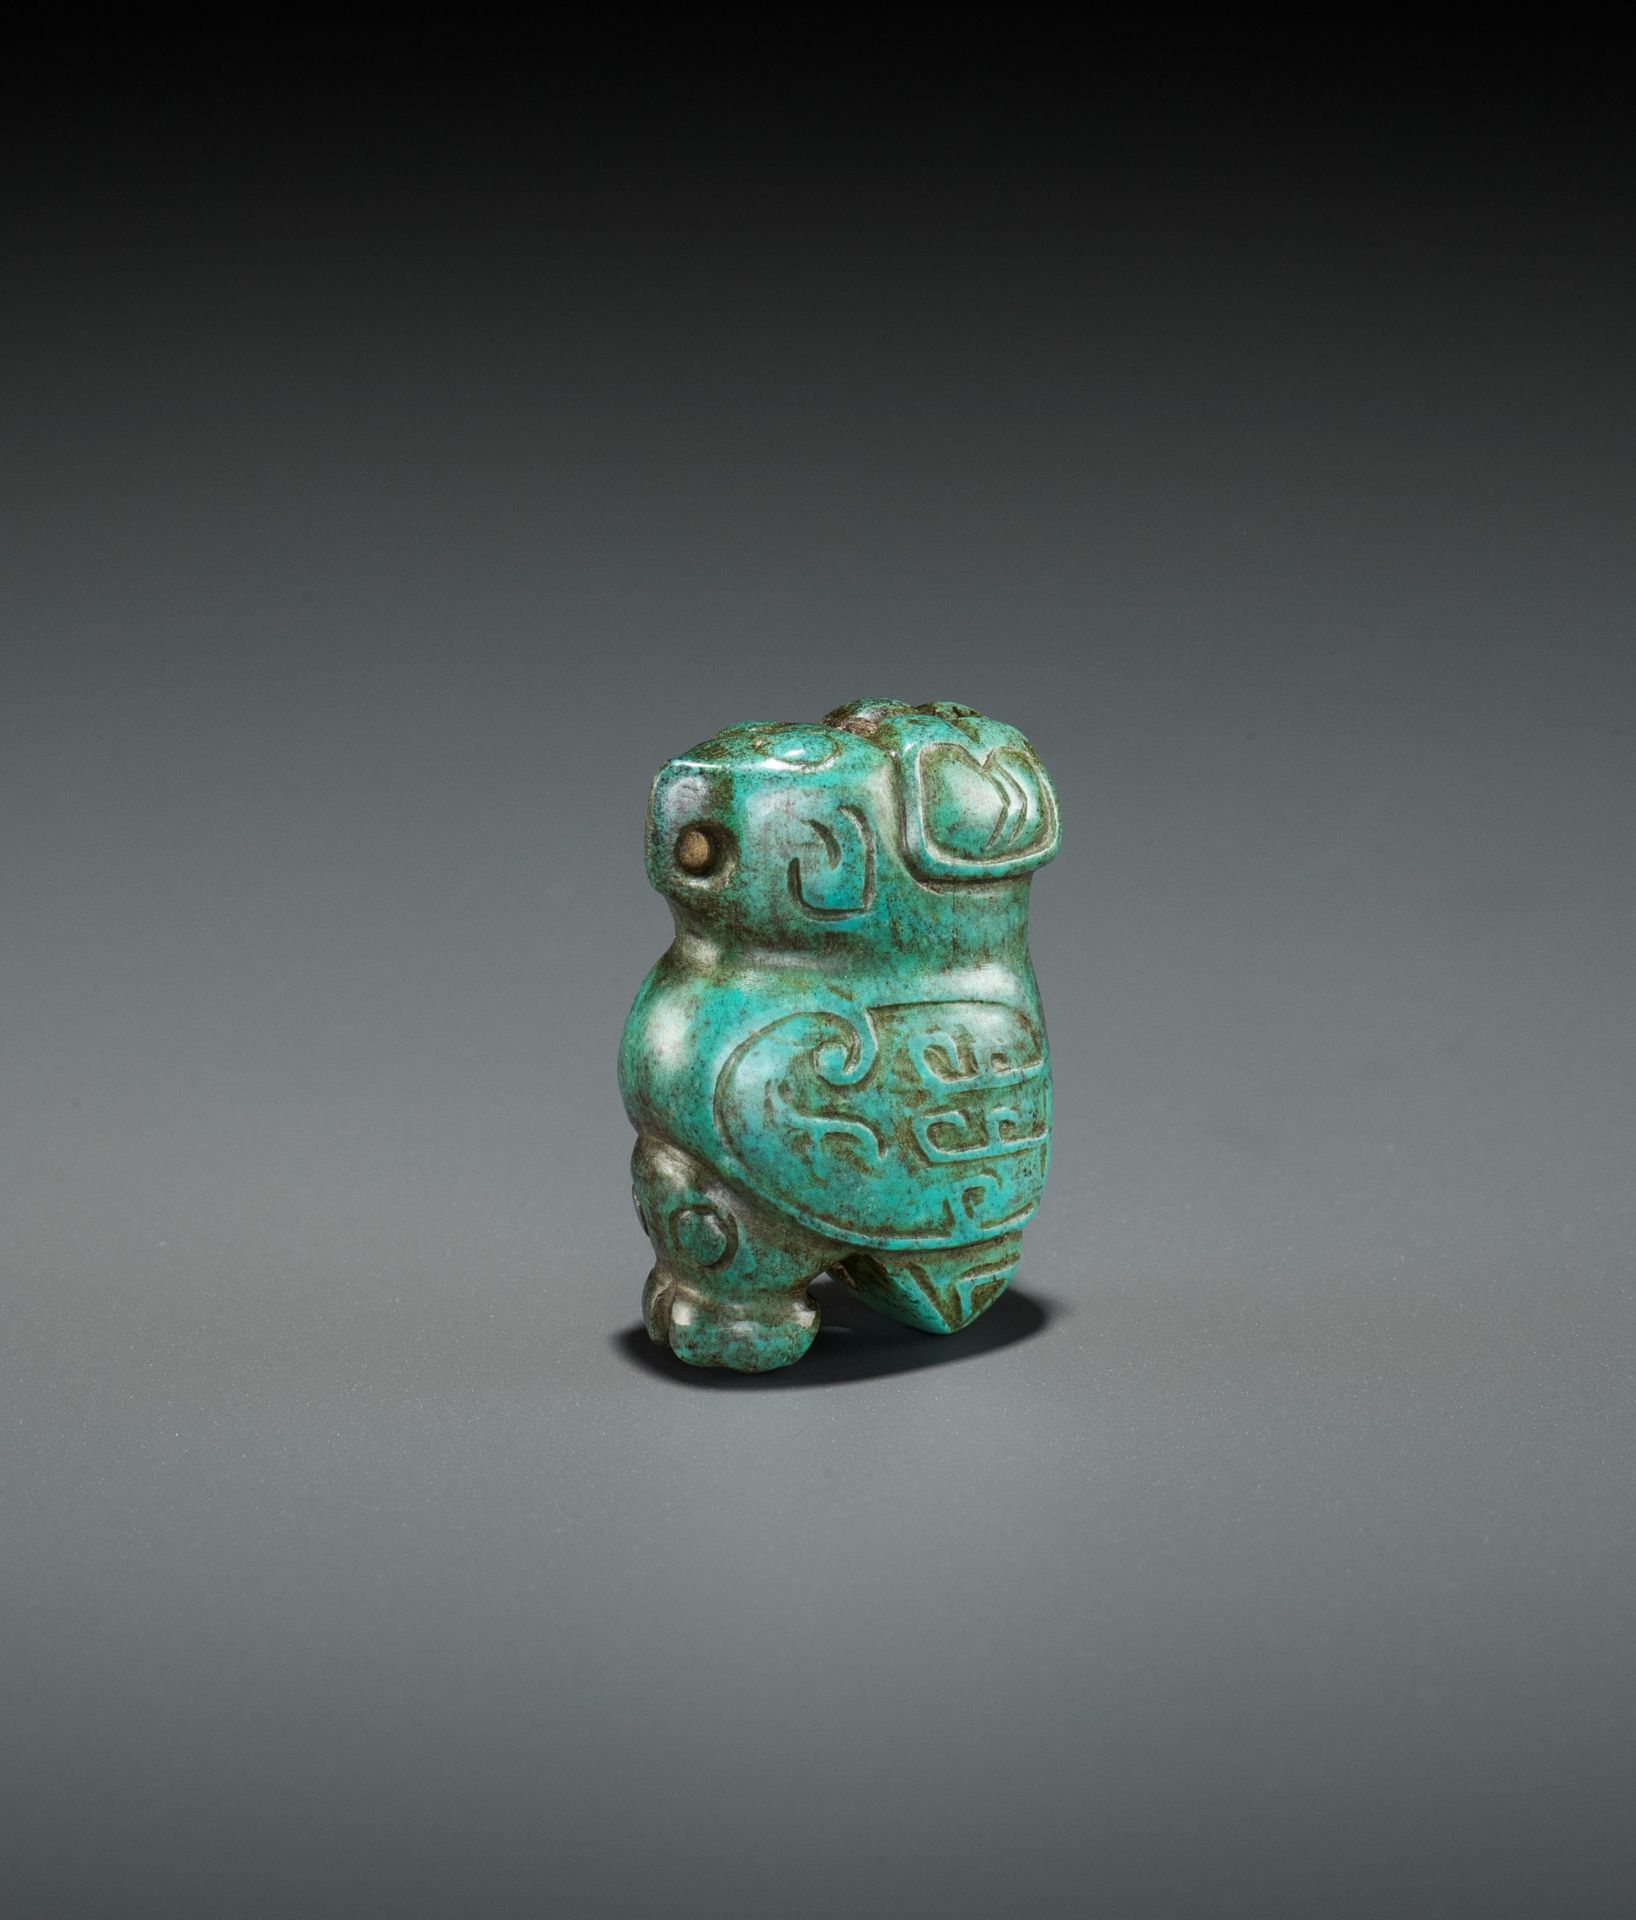 A TURQUOISE MATRIX PENDANT DEPICTING AN OWL, LATE SHANG DYNASTY